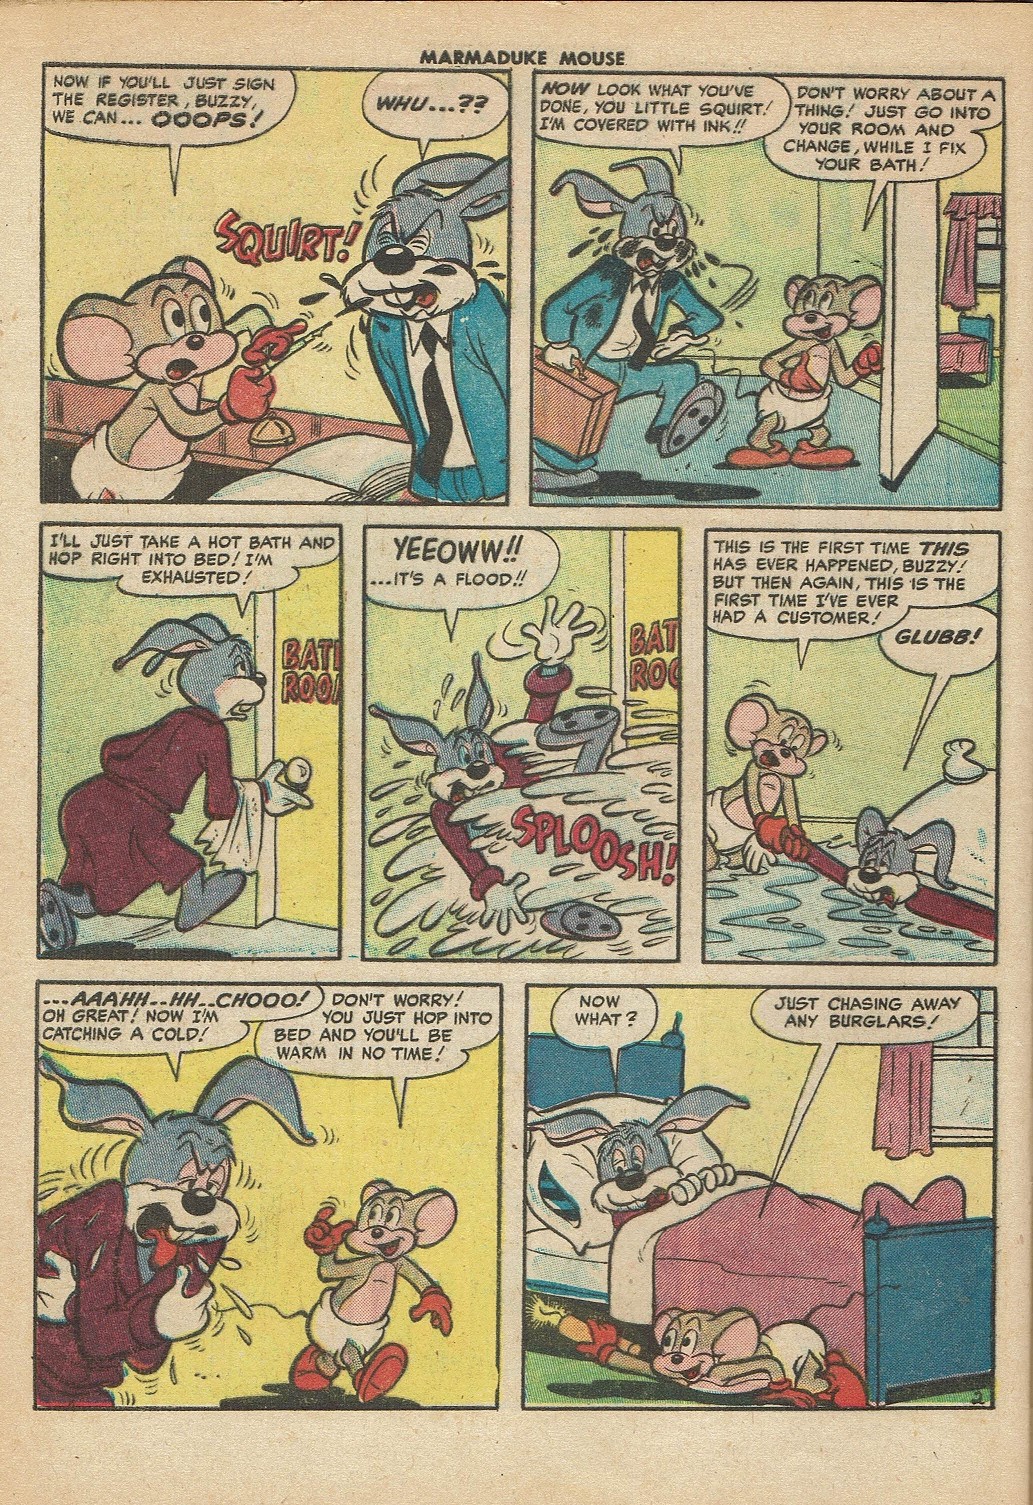 Read online Marmaduke Mouse comic -  Issue #47 - 30